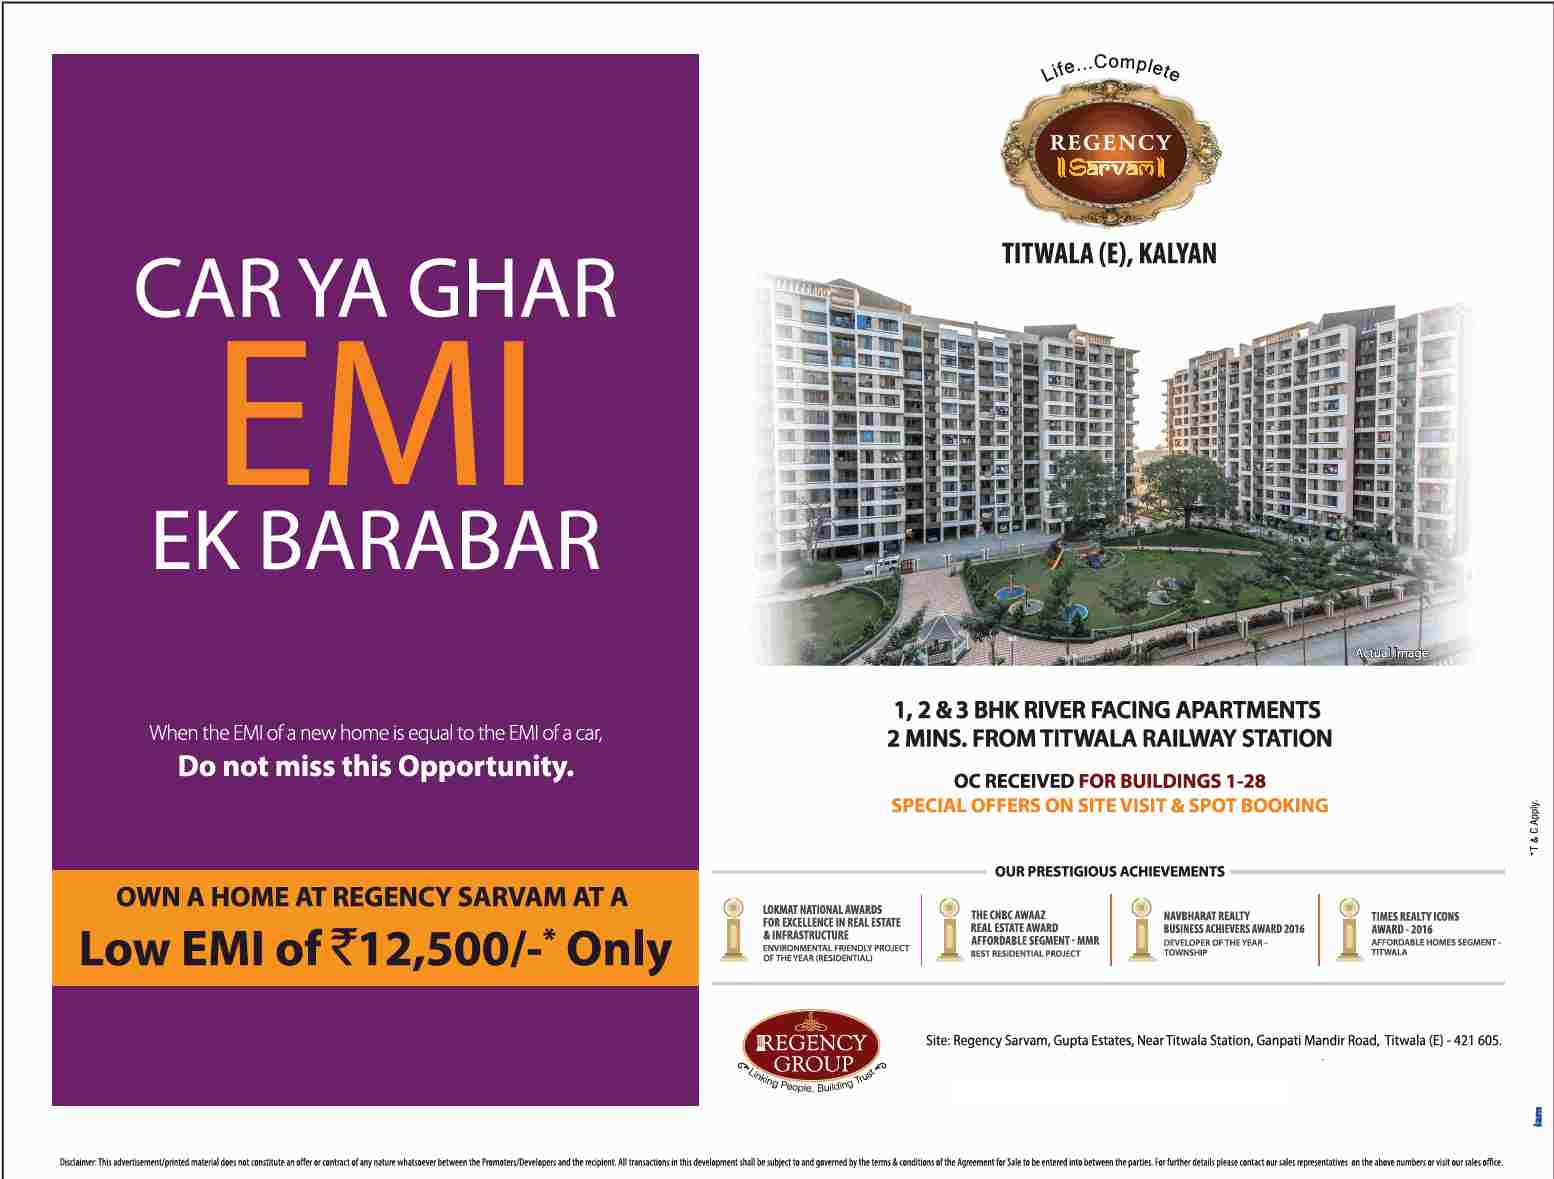 Own a home with low EMI of Rs. 12,500 at Regency Sarvam in Mumbai Update